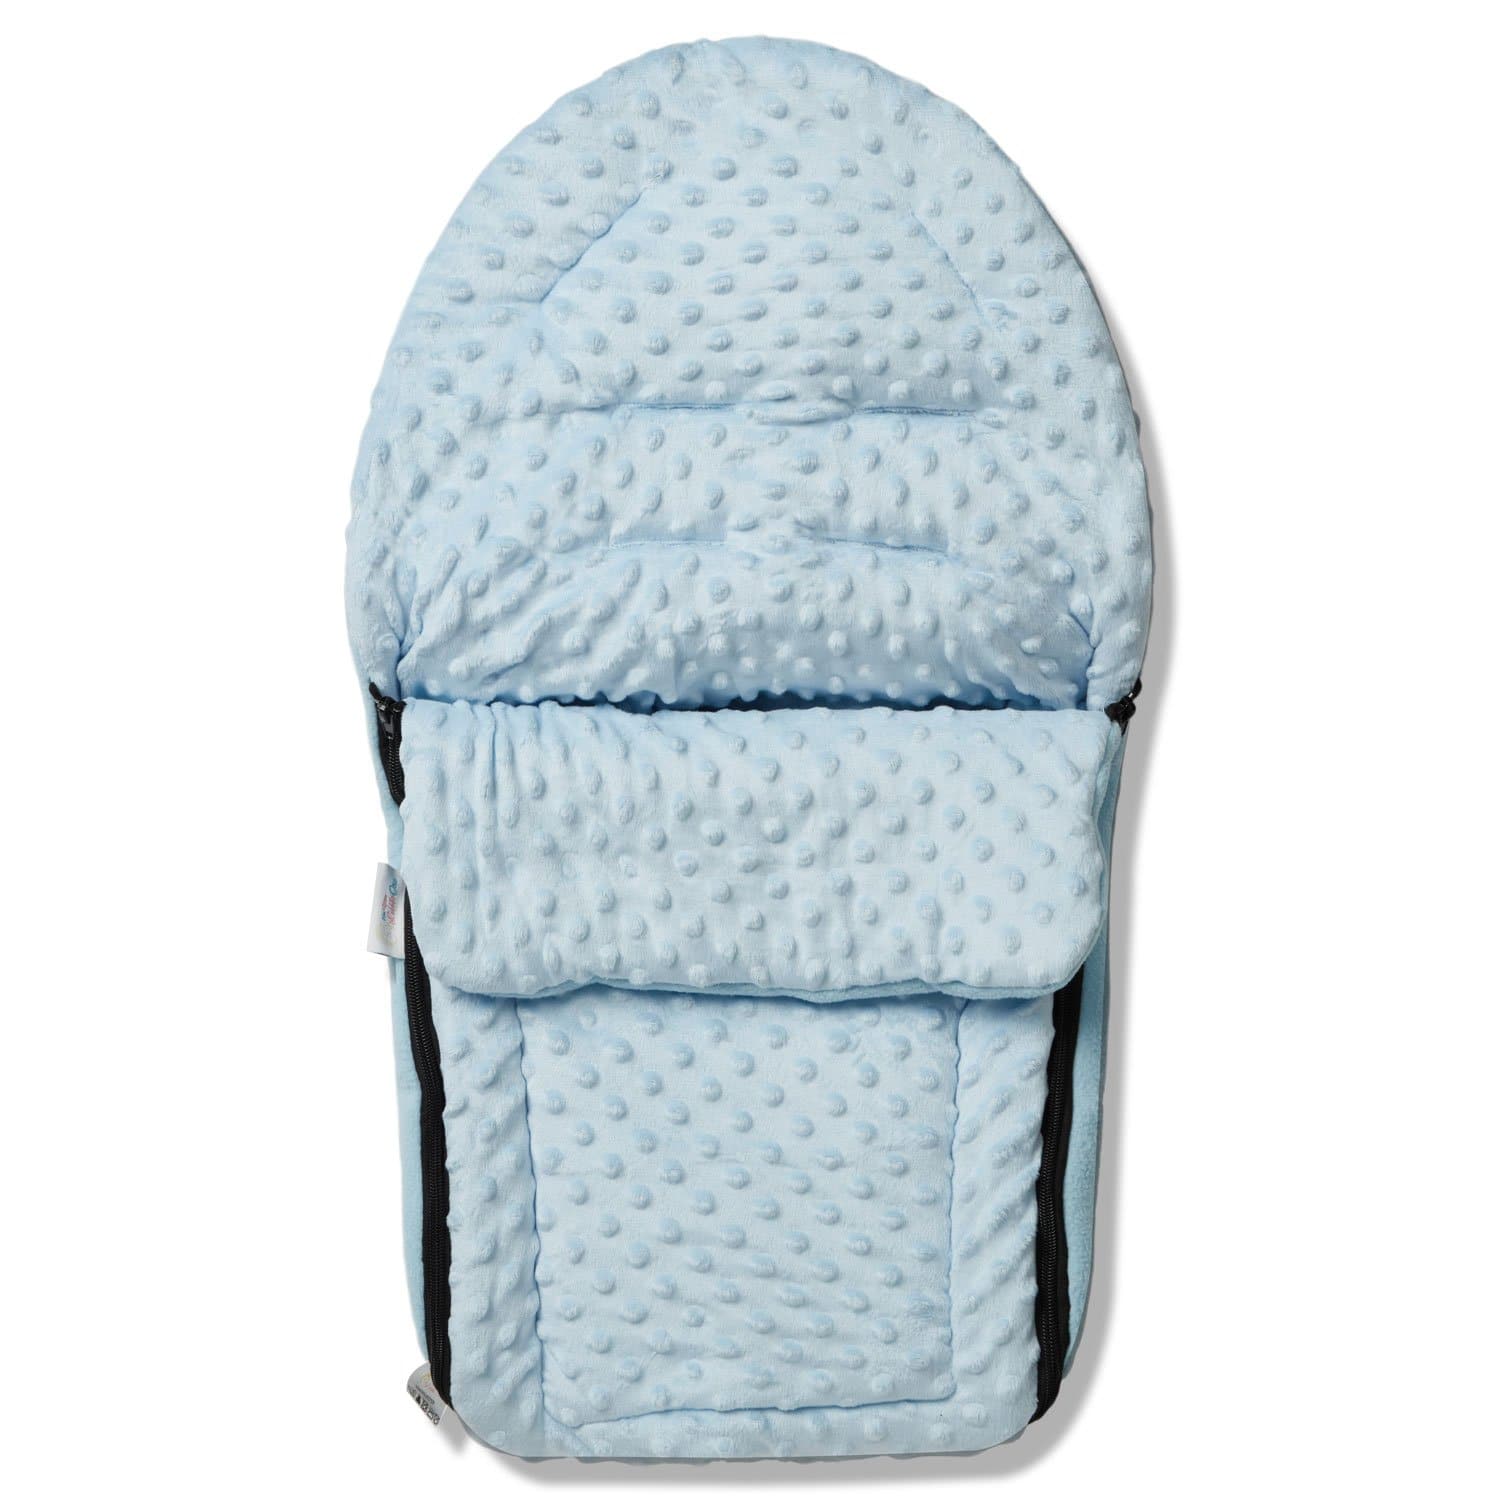 Universal Dimple Car Seat Footmuff / Cosy Toes - Fits All 3 And 5 Point Harnesses - Blue / Fits All Models | For Your Little One